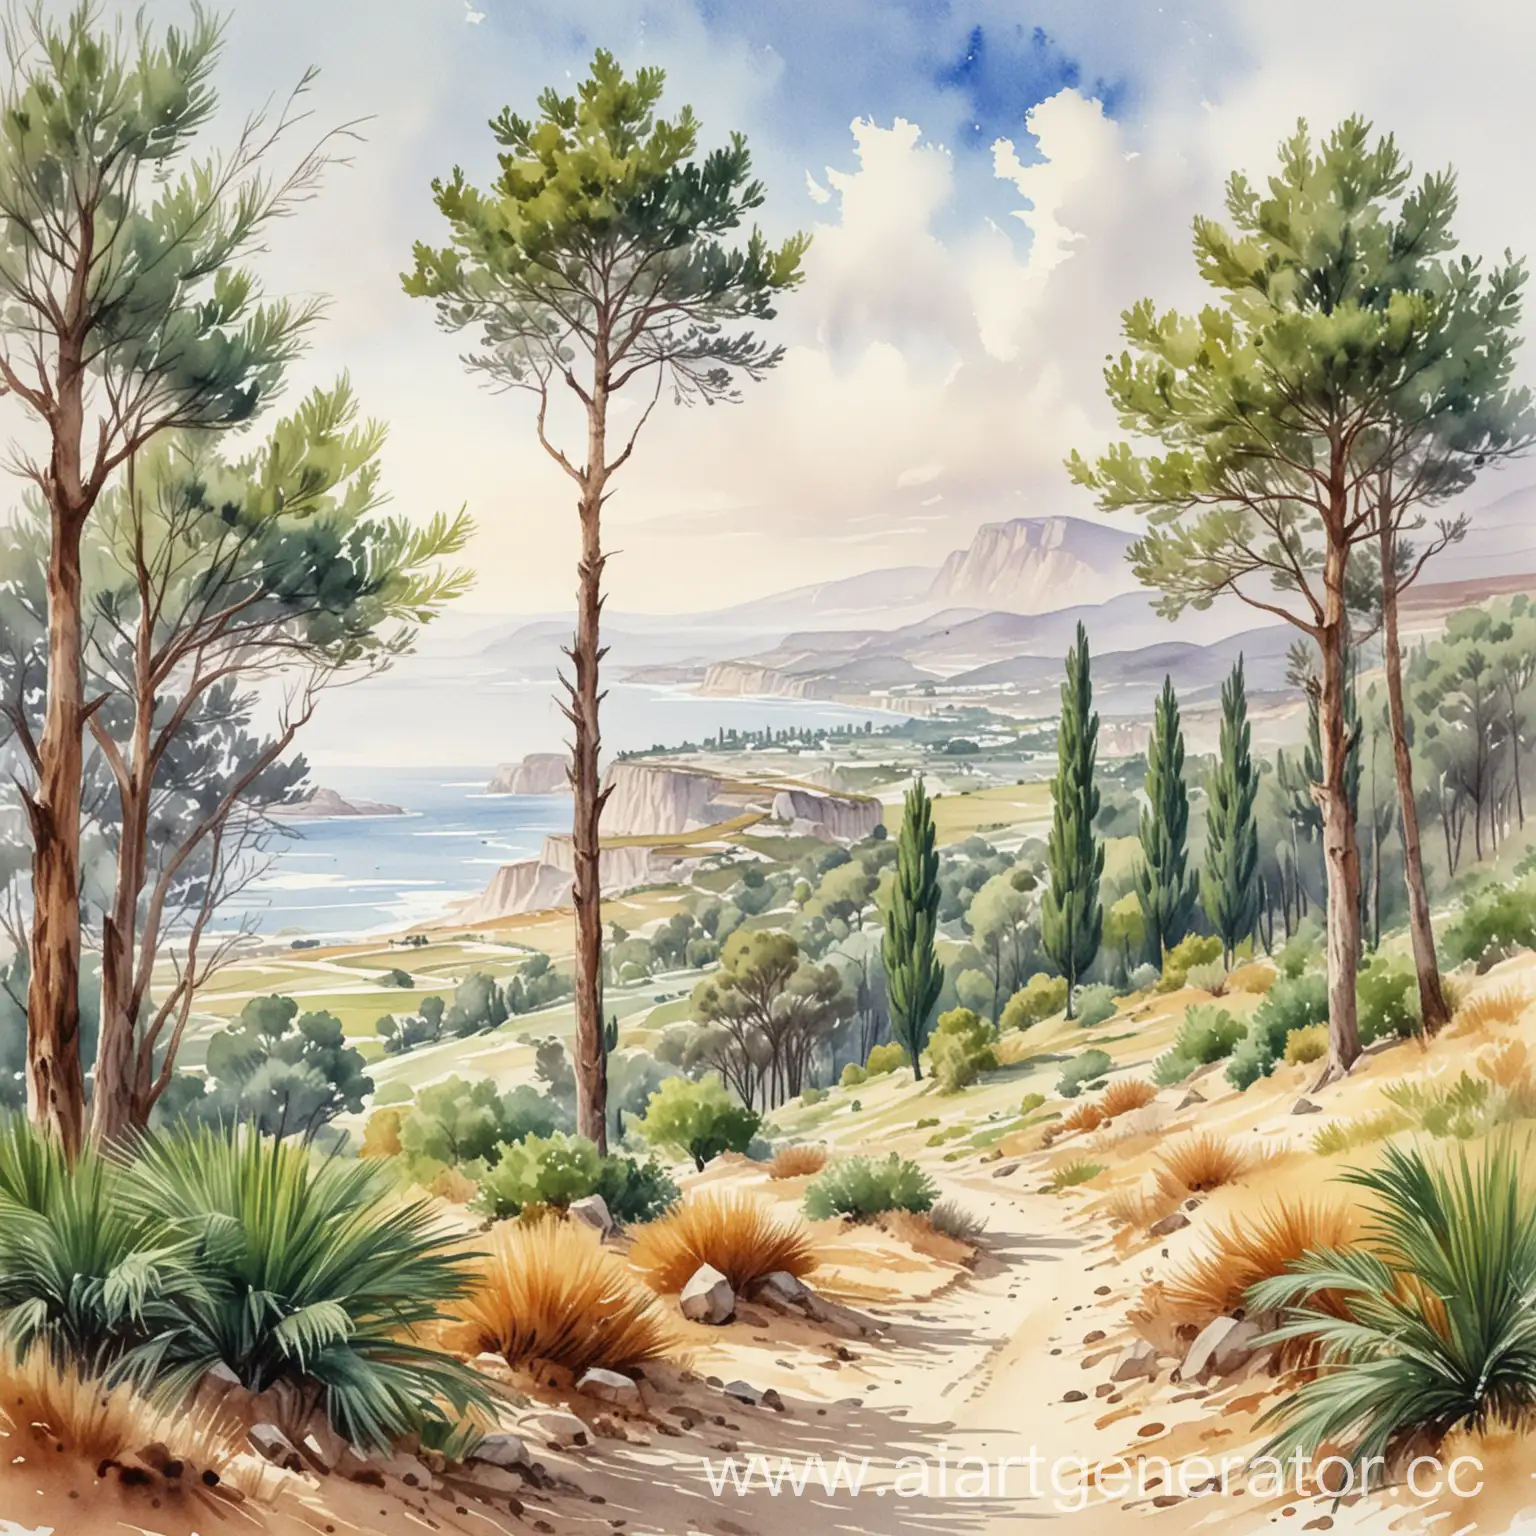 Watercolor-Drawing-of-Russia-Crimea-Landscape-with-Palm-and-Cypress